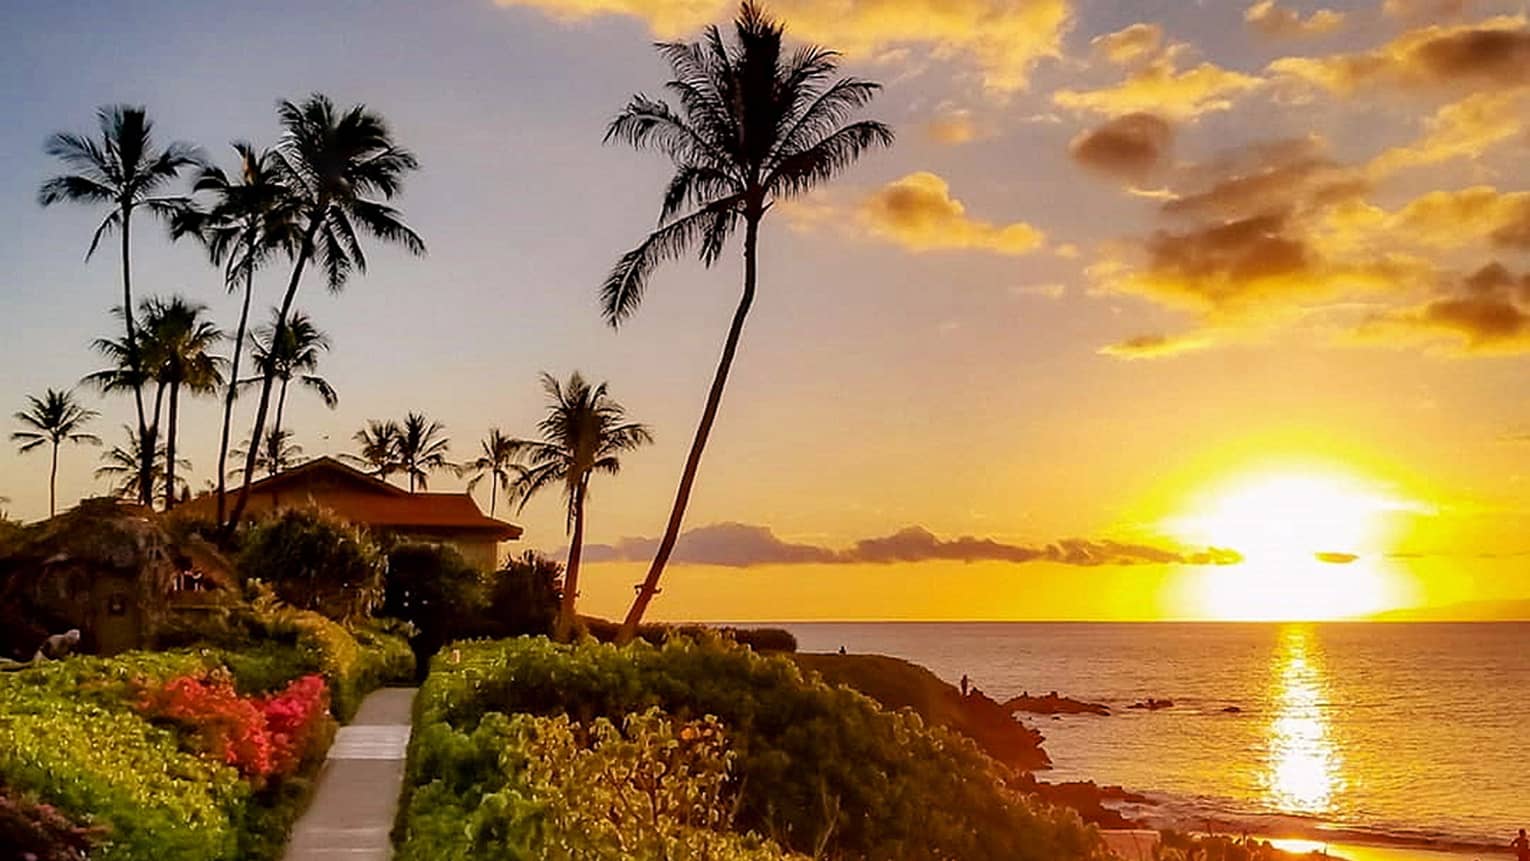 A narrow walking path leads to a hut surrounded by palm trees, with the ocean reflecting the brilliant golden sunset glow.